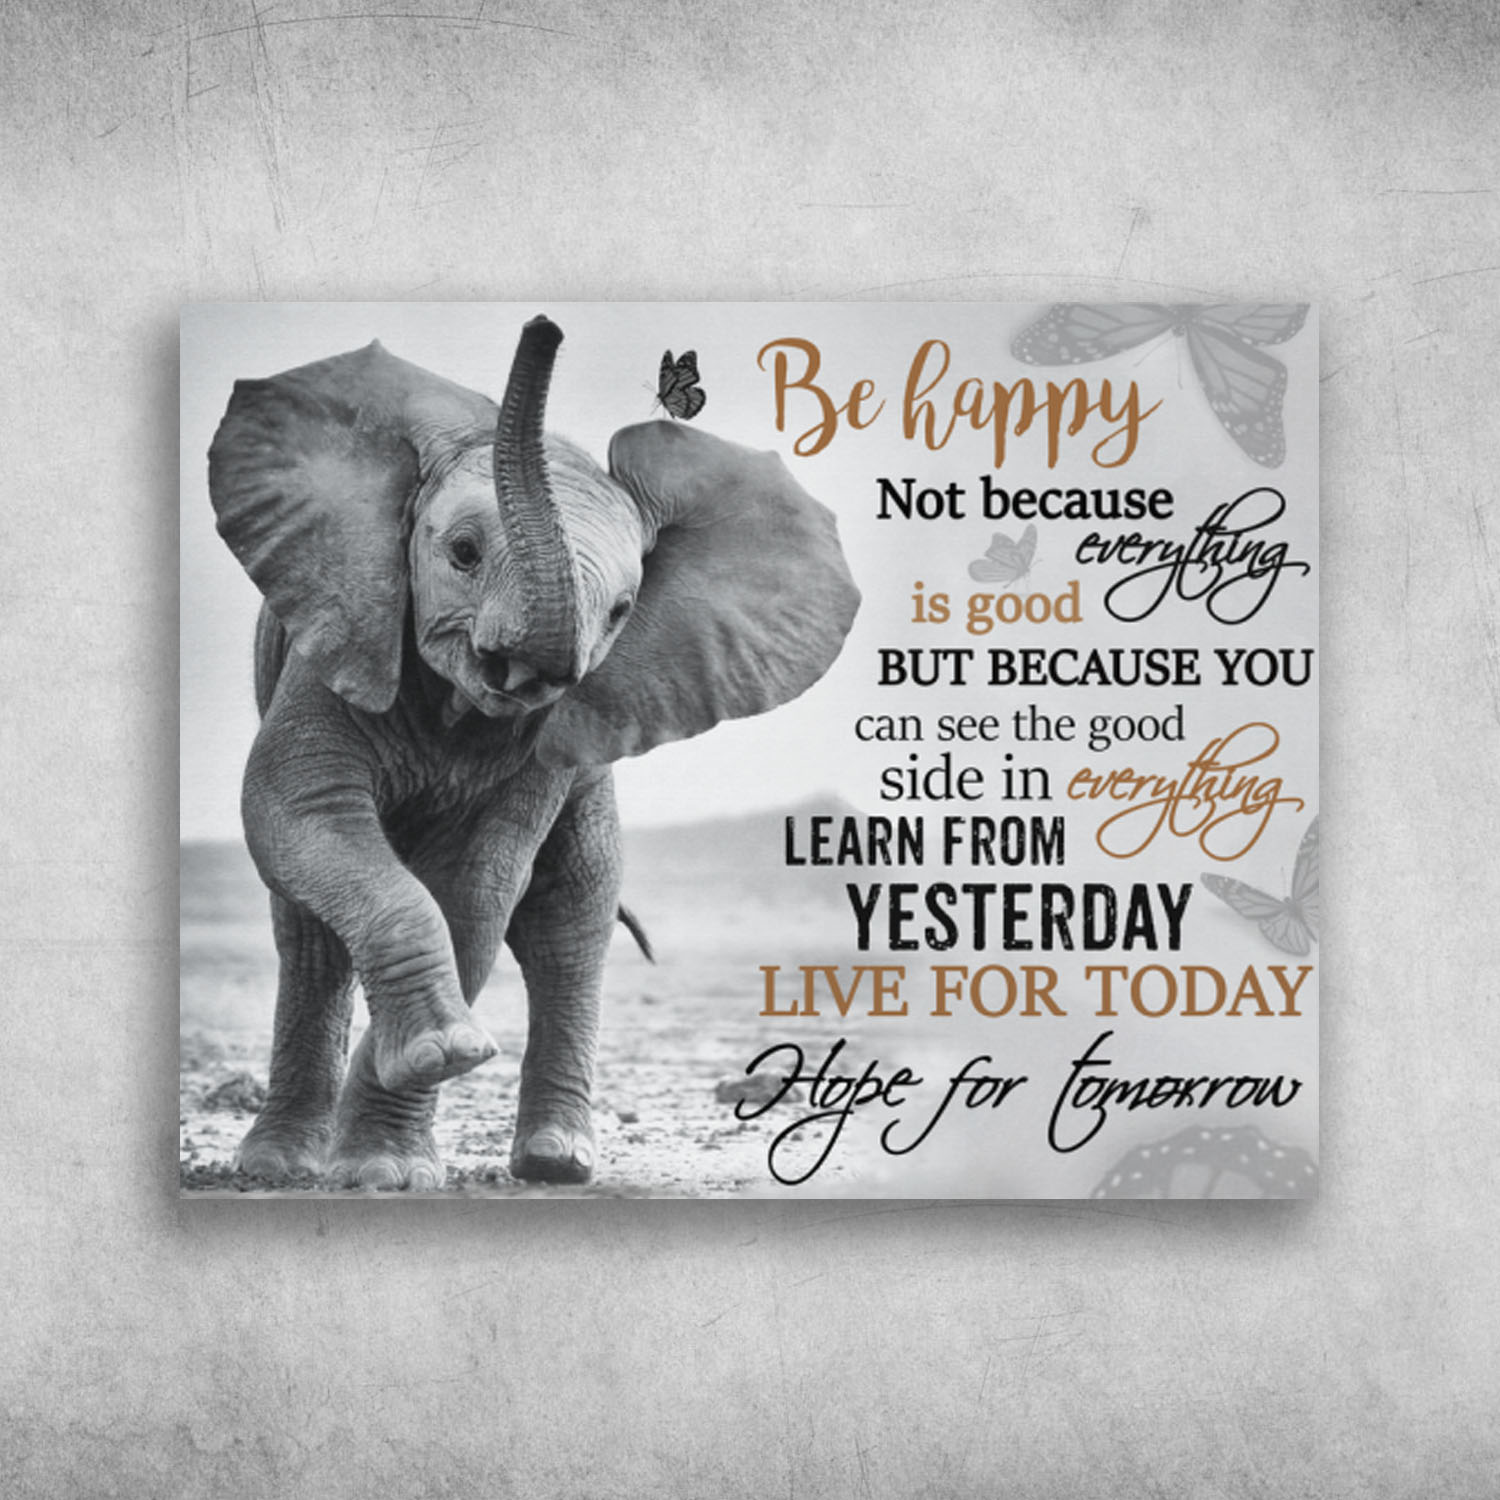 Live For Today Hope For Tomorrow Elephant And Butterfly